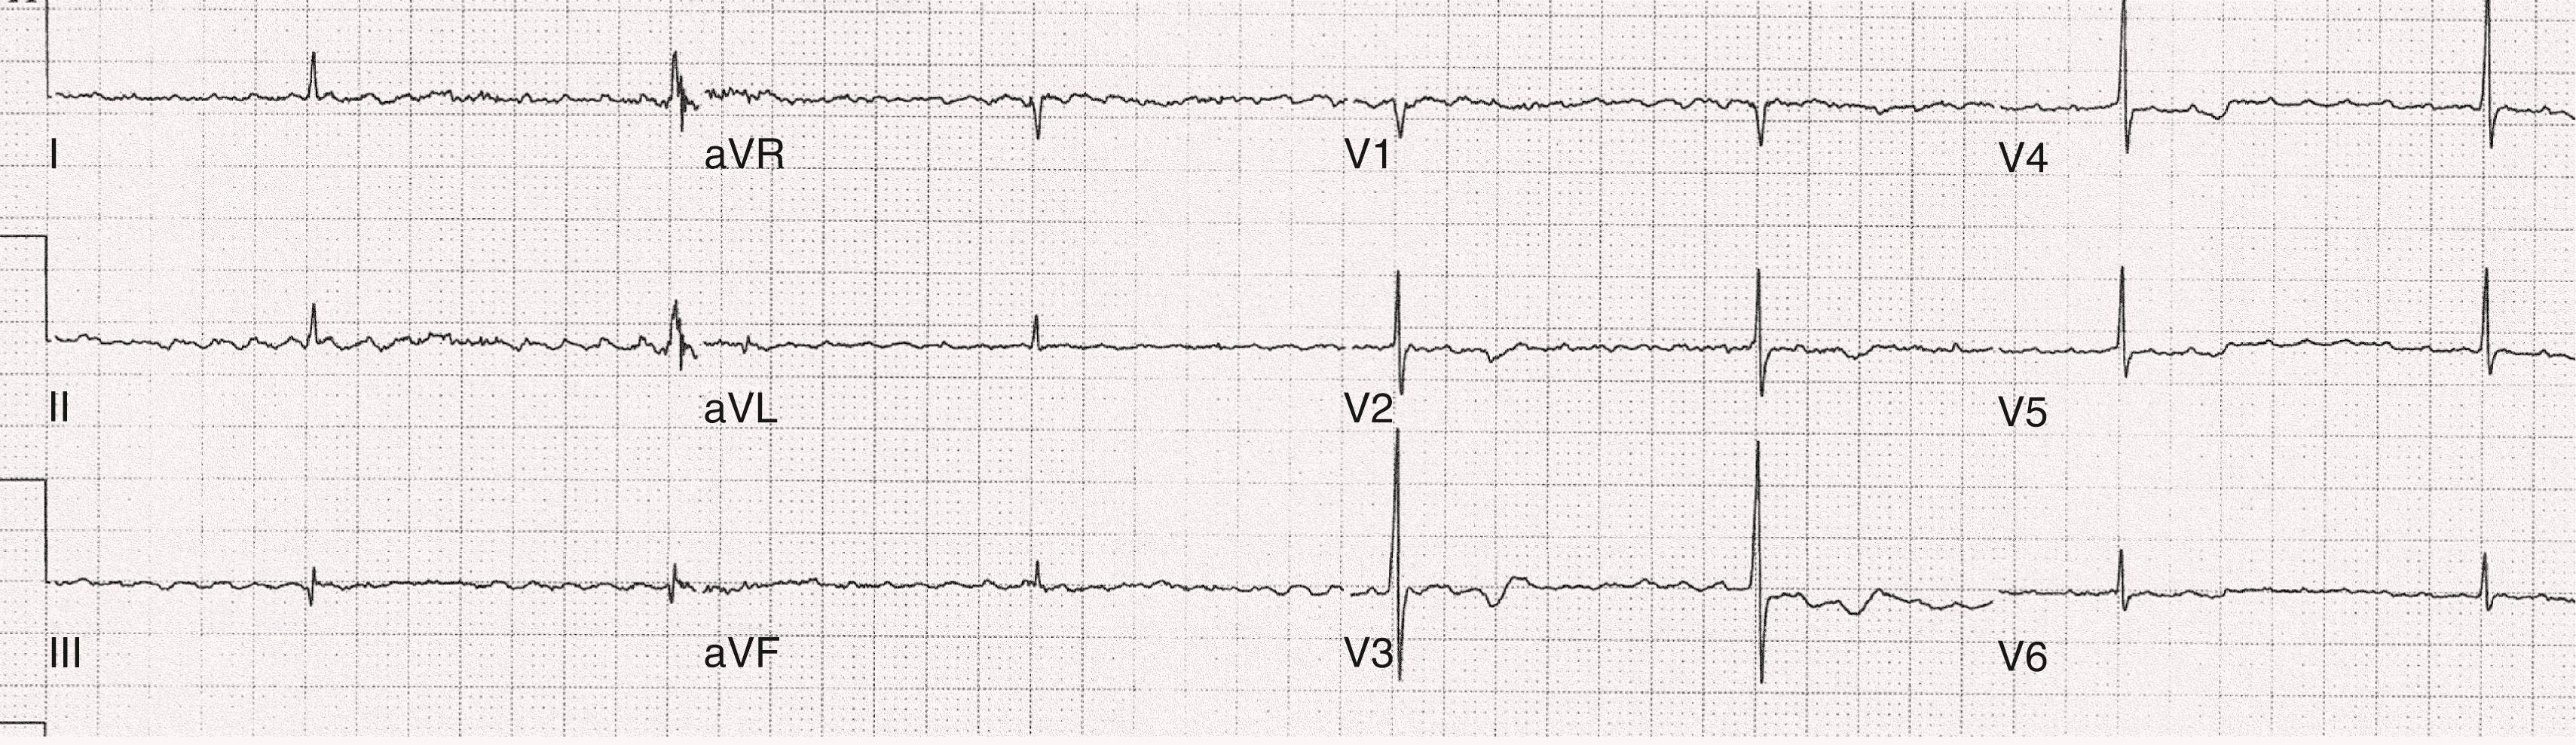 FIGURE 66.5, A 12-lead electrocardiogram of AF and a regular junctional rhythm at a rate of 43 beats/min. There is either underlying third-degree AV block or second-degree AV block with extremely slow atrioventricular conduction allowing a junctional escape rhythm to become manifest.